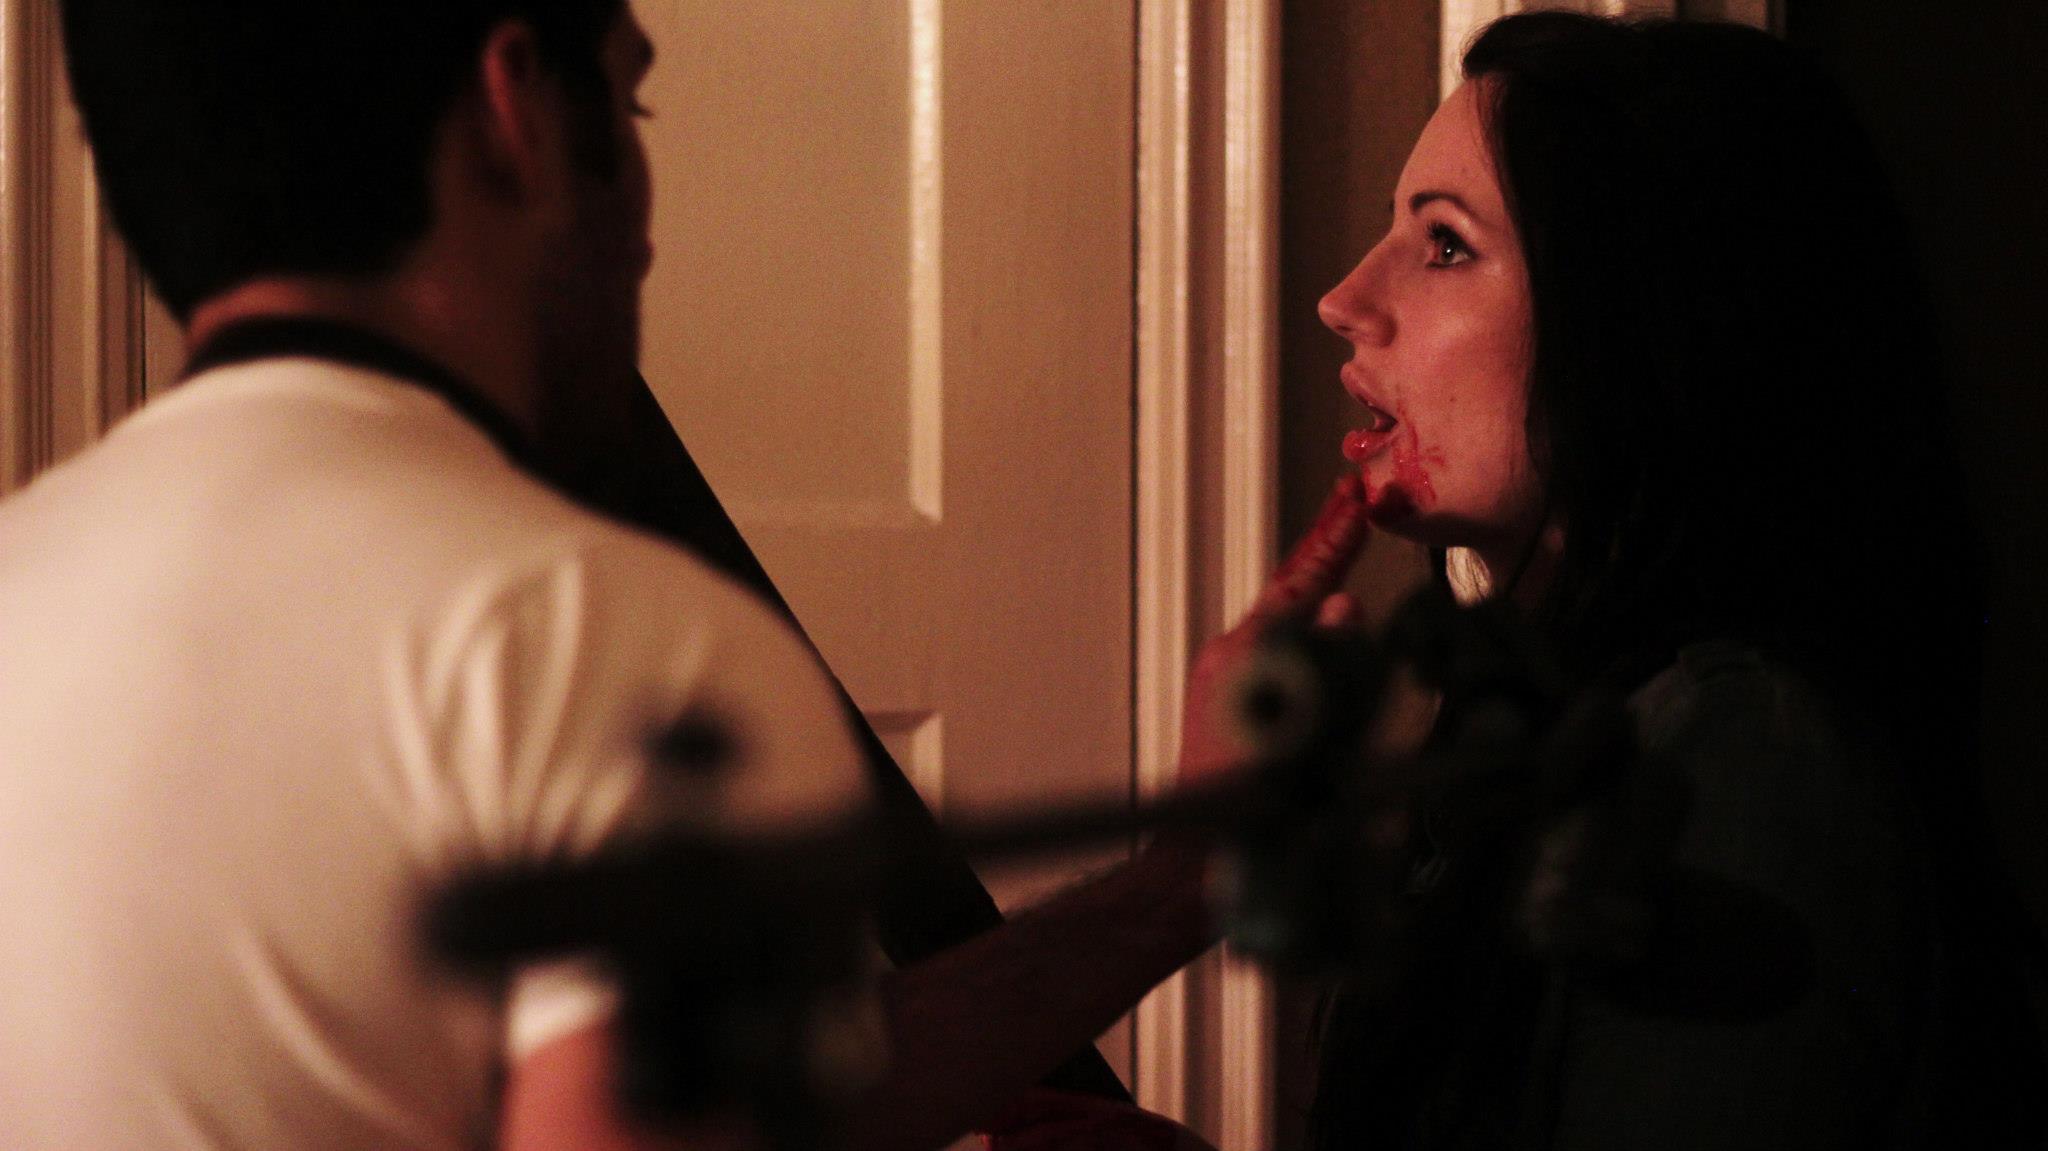 Production still from currently untitled horror film